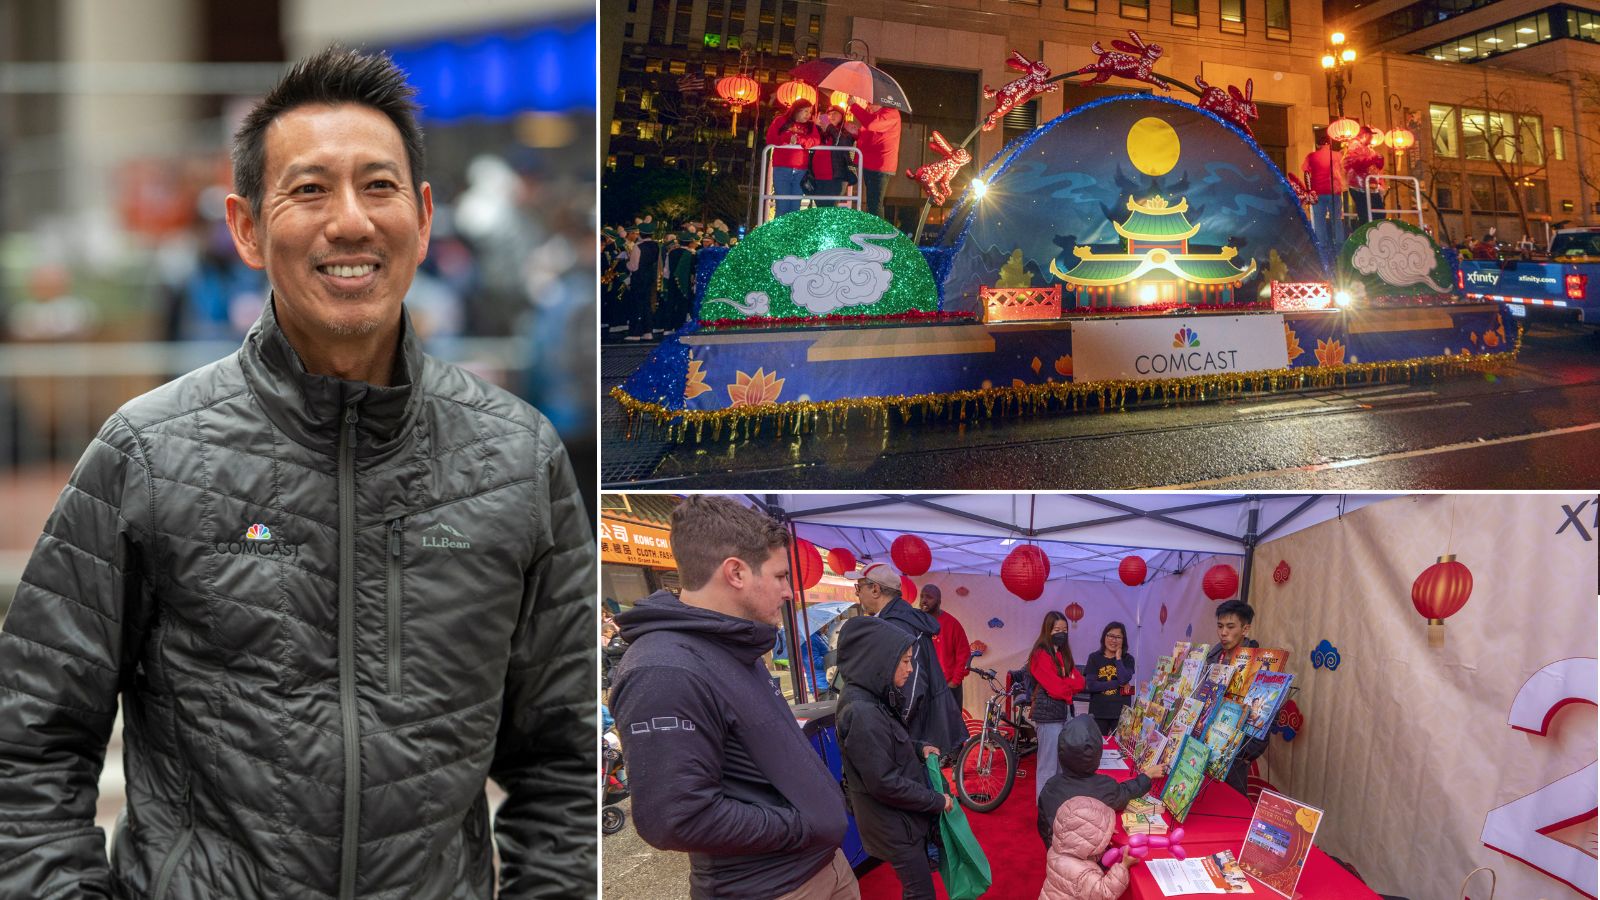 Comcaster Dillon Auyoung Shares His Experiences Celebrating Lunar New Year in San Francisco